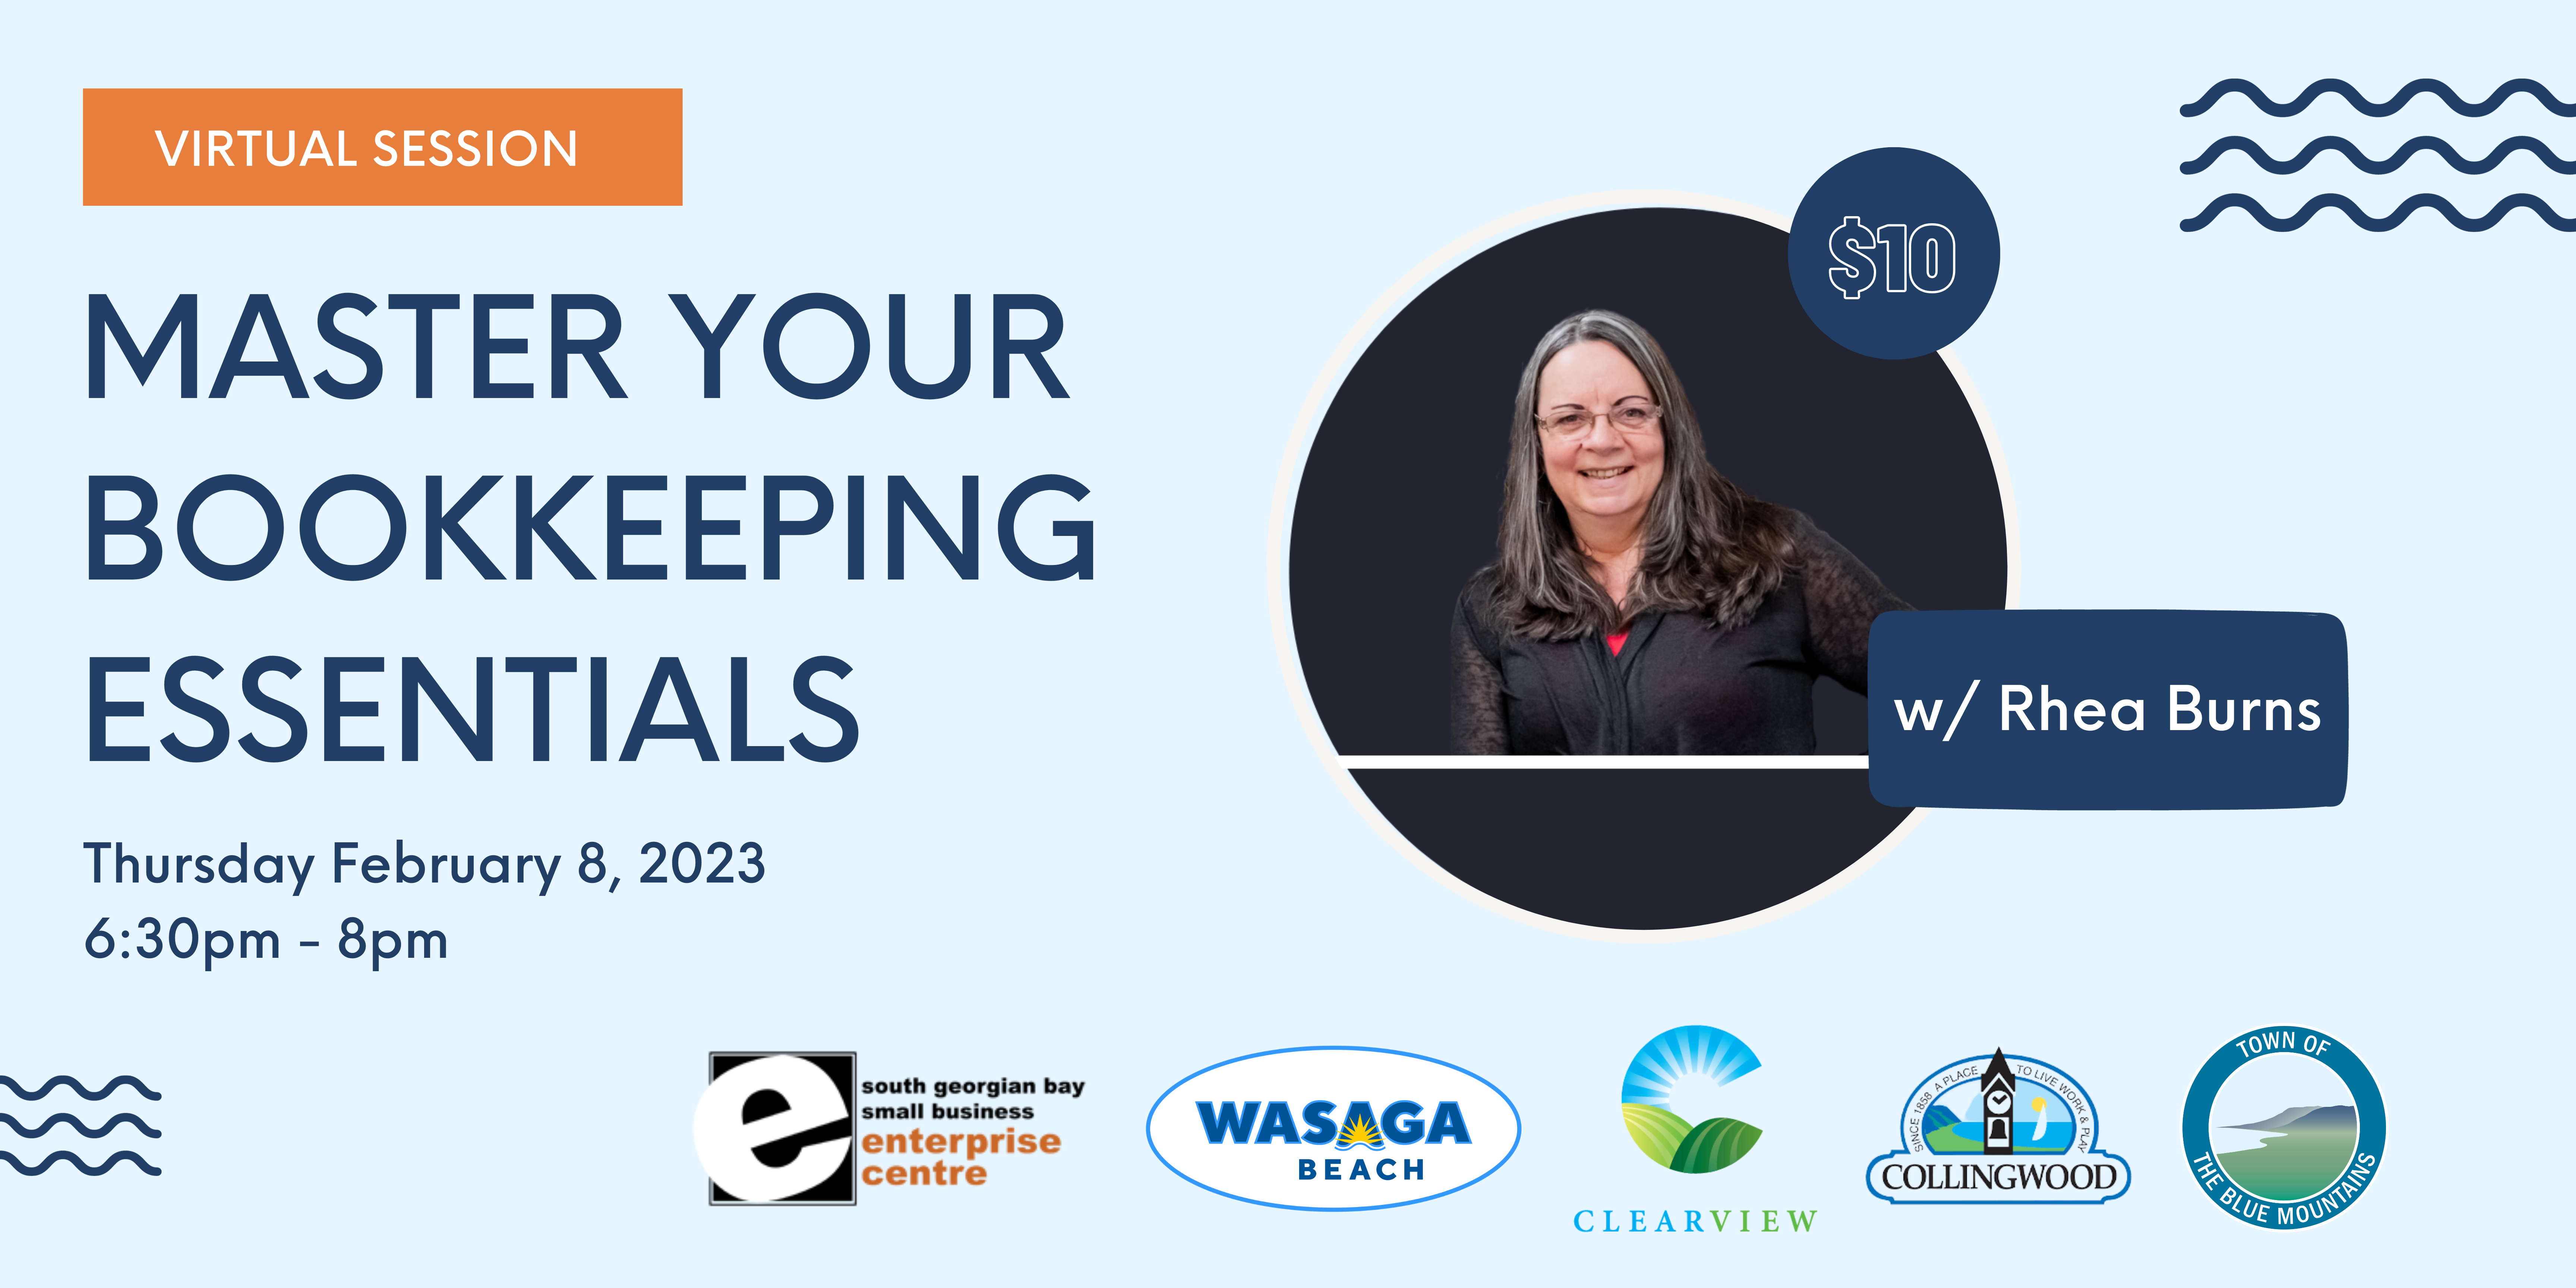 Master your bookkeeping essentials with Rhea Burns on Thursday February 8. This is a virtual session from 6:30pm to 8pm.